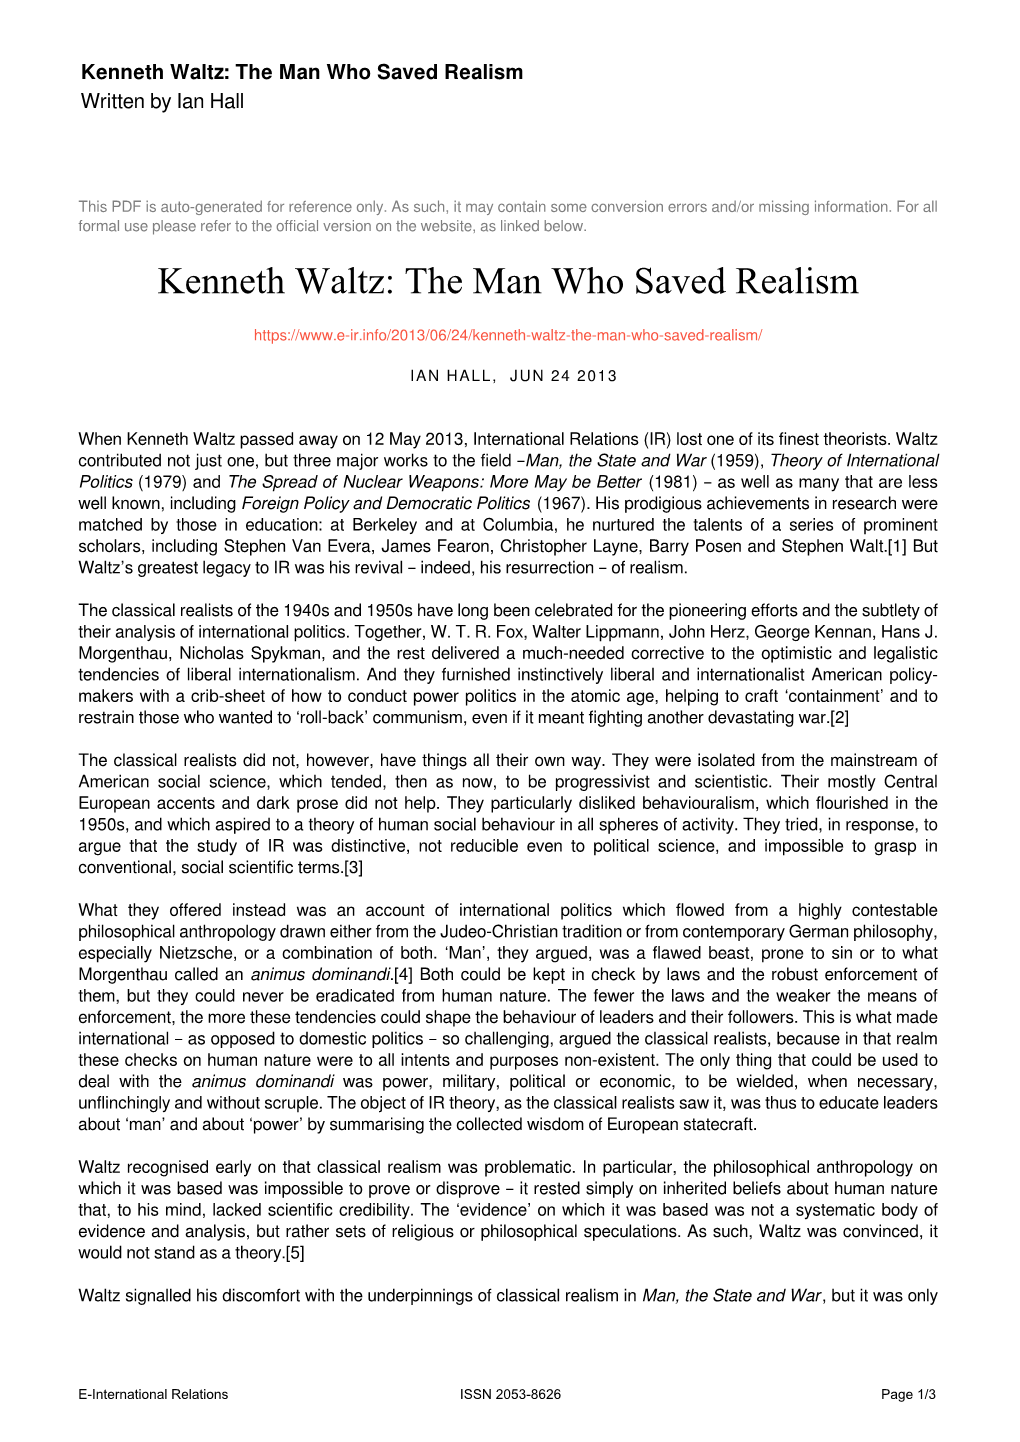 Kenneth Waltz: the Man Who Saved Realism Written by Ian Hall